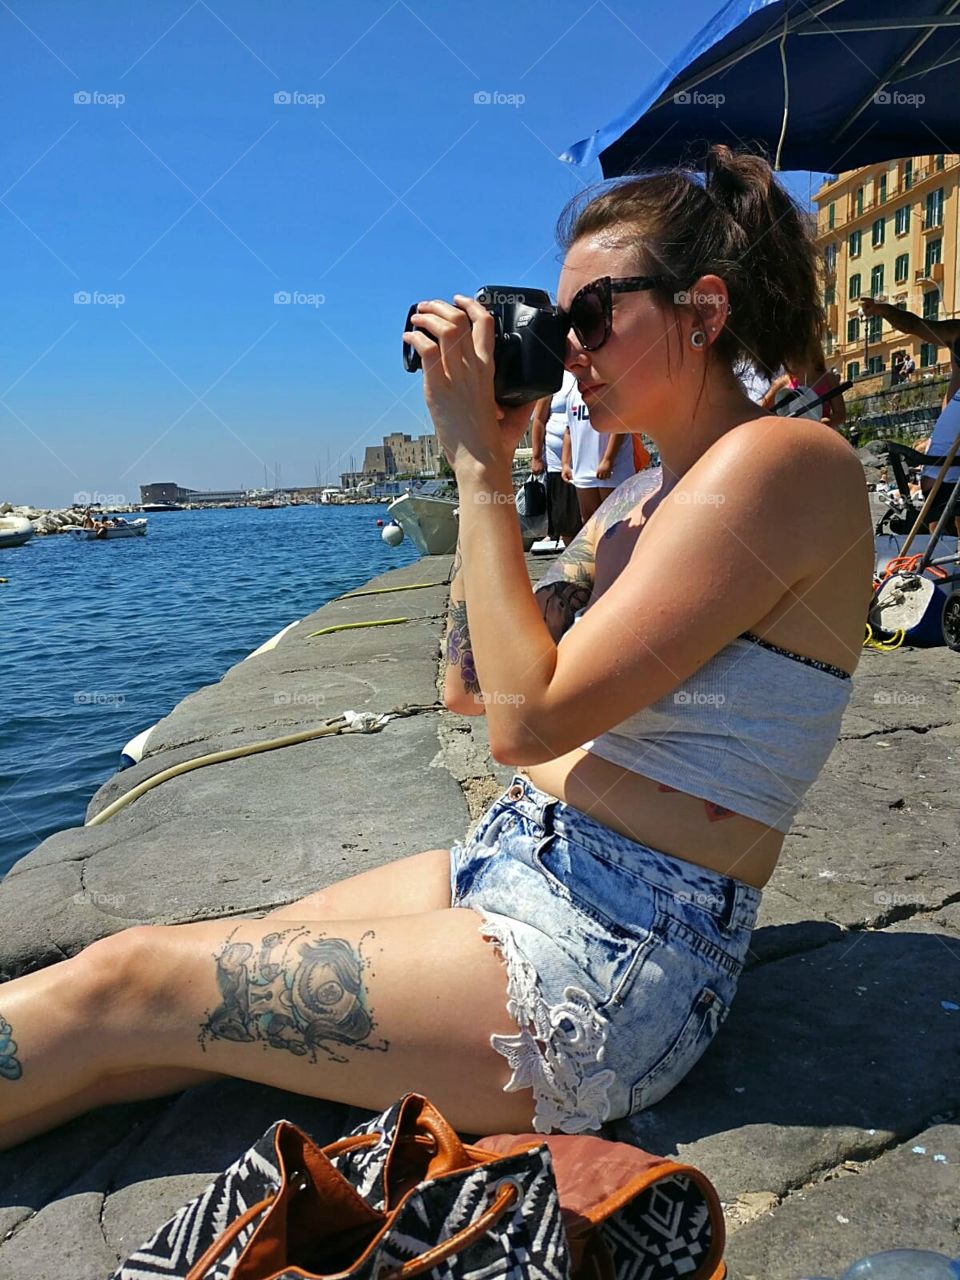 exploring Naples in Italy, capturing the scenes by the shores, taking in the sea view and feeling the sun beating down.